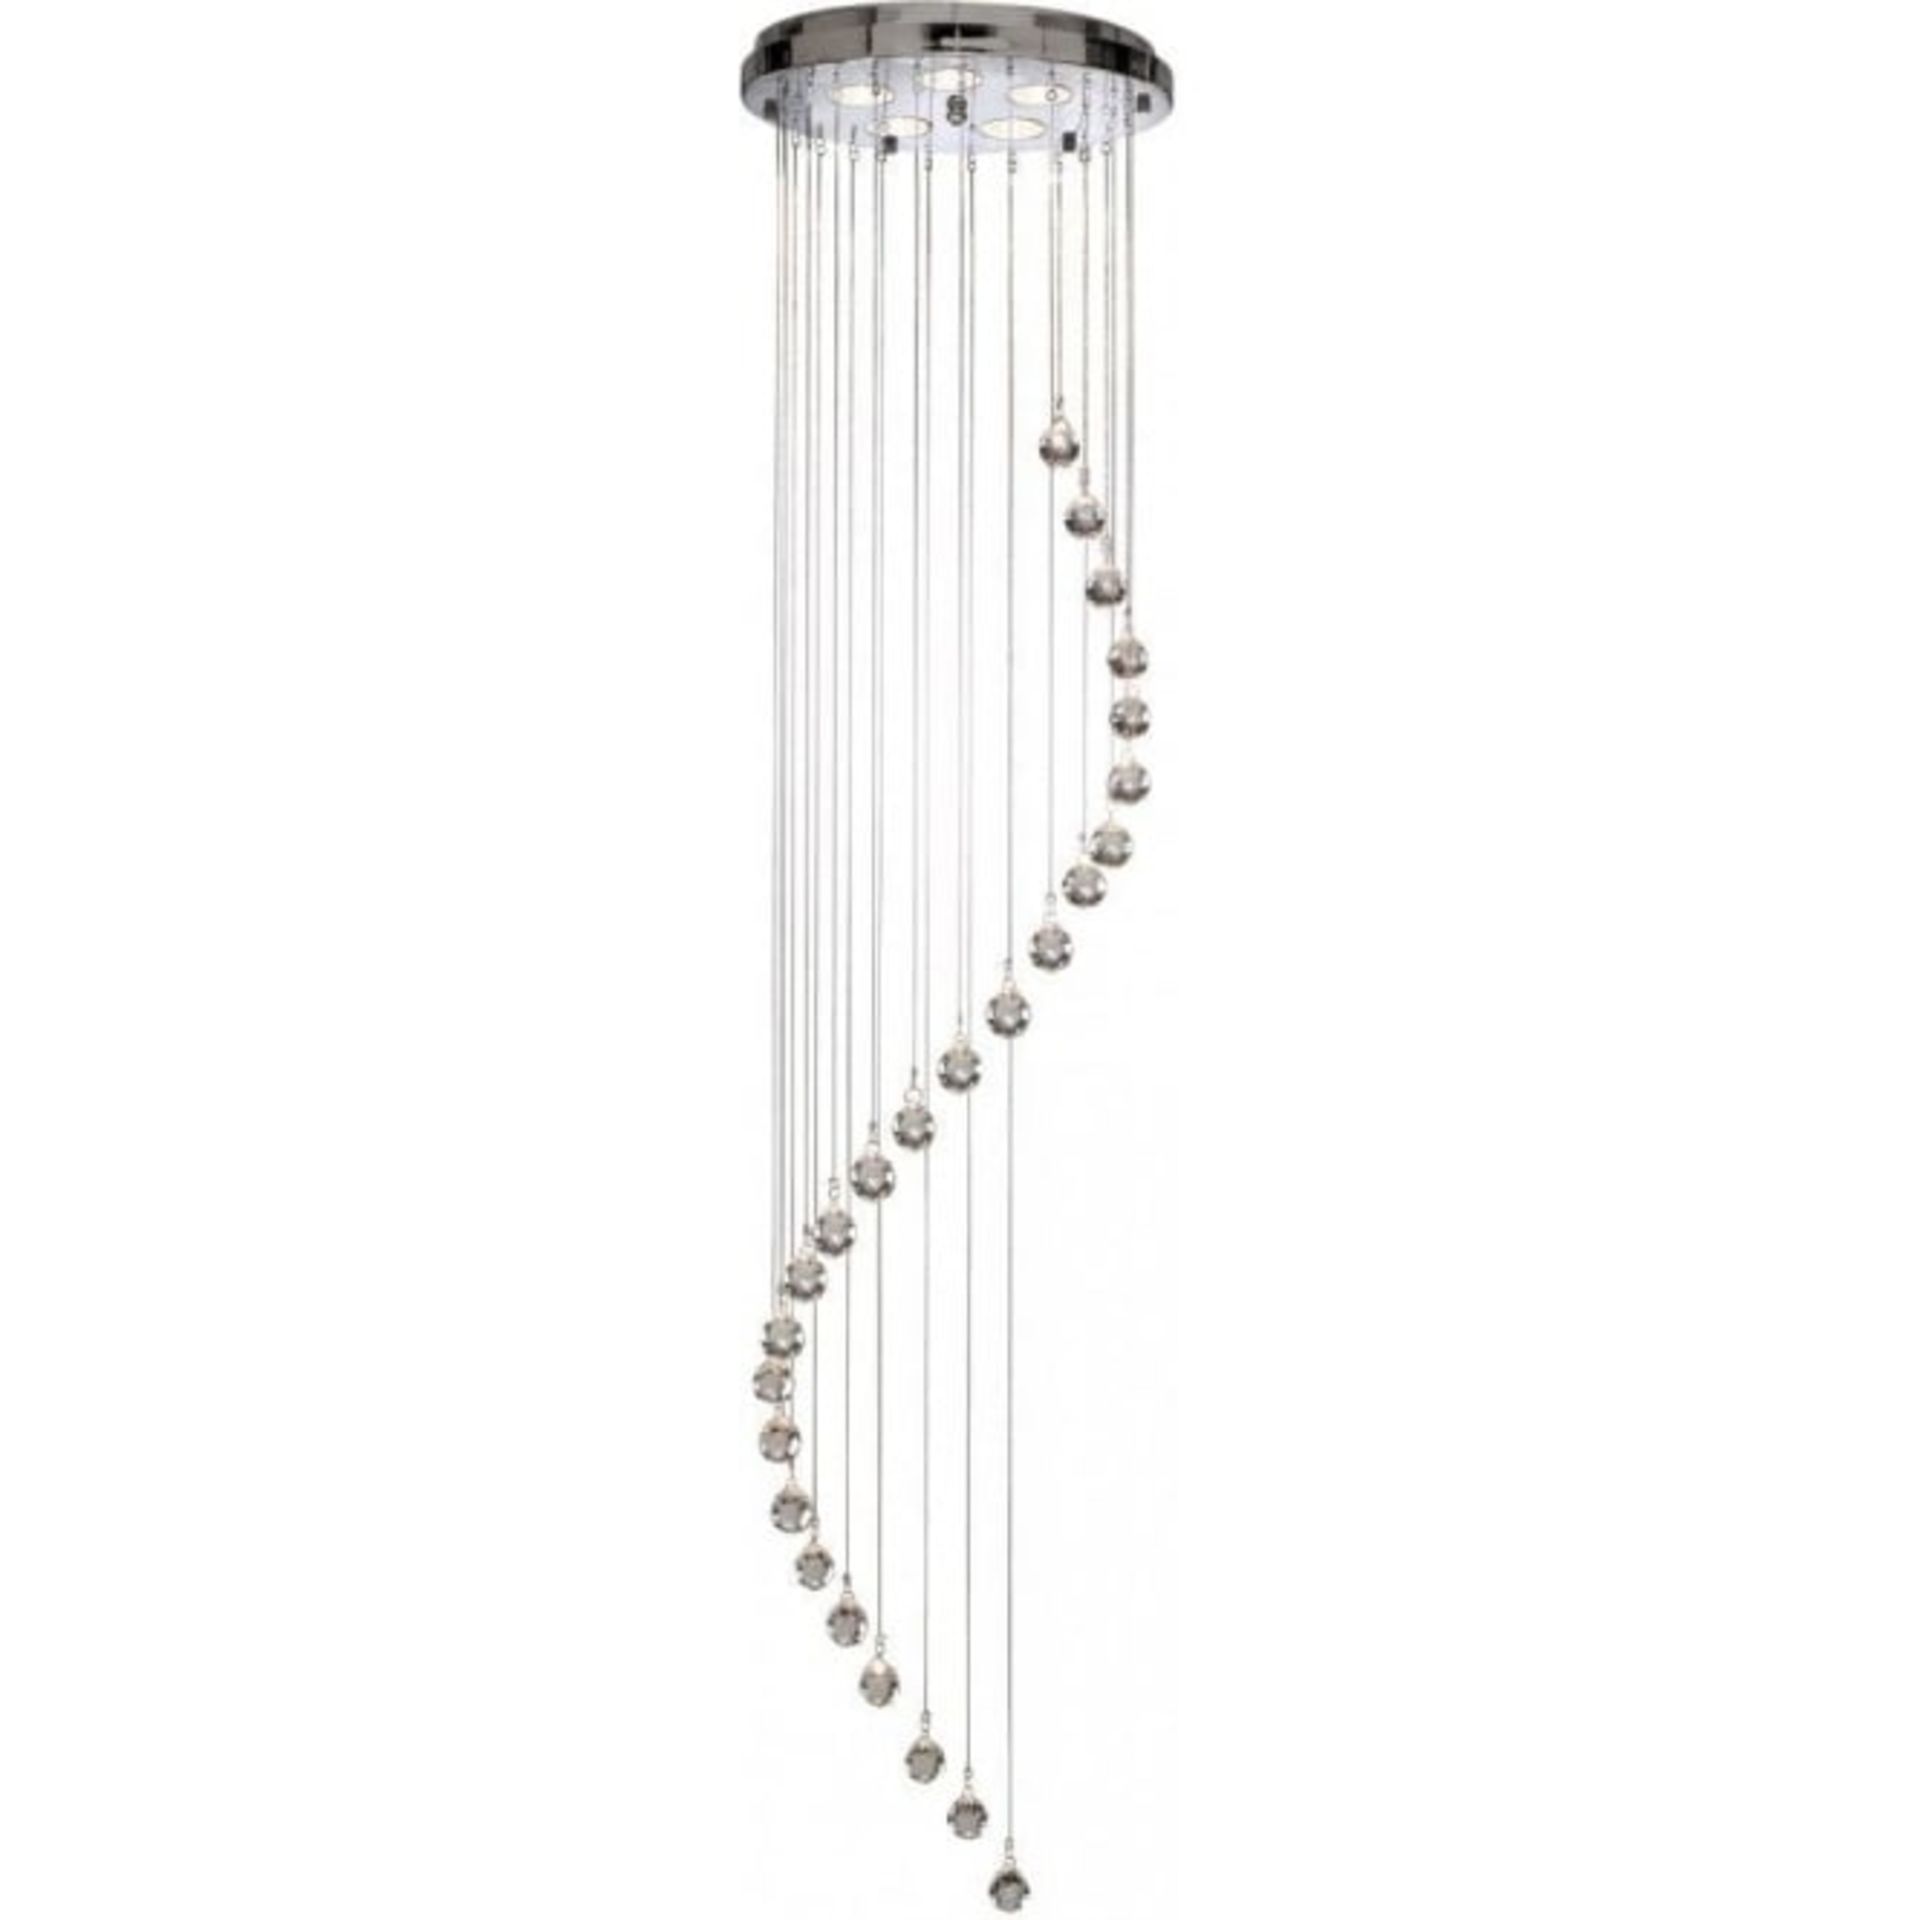 1 x Searchlight Spiral Chrome 5 Light Ceiling Light With Crystal Balls - Product Code: 5742CC -